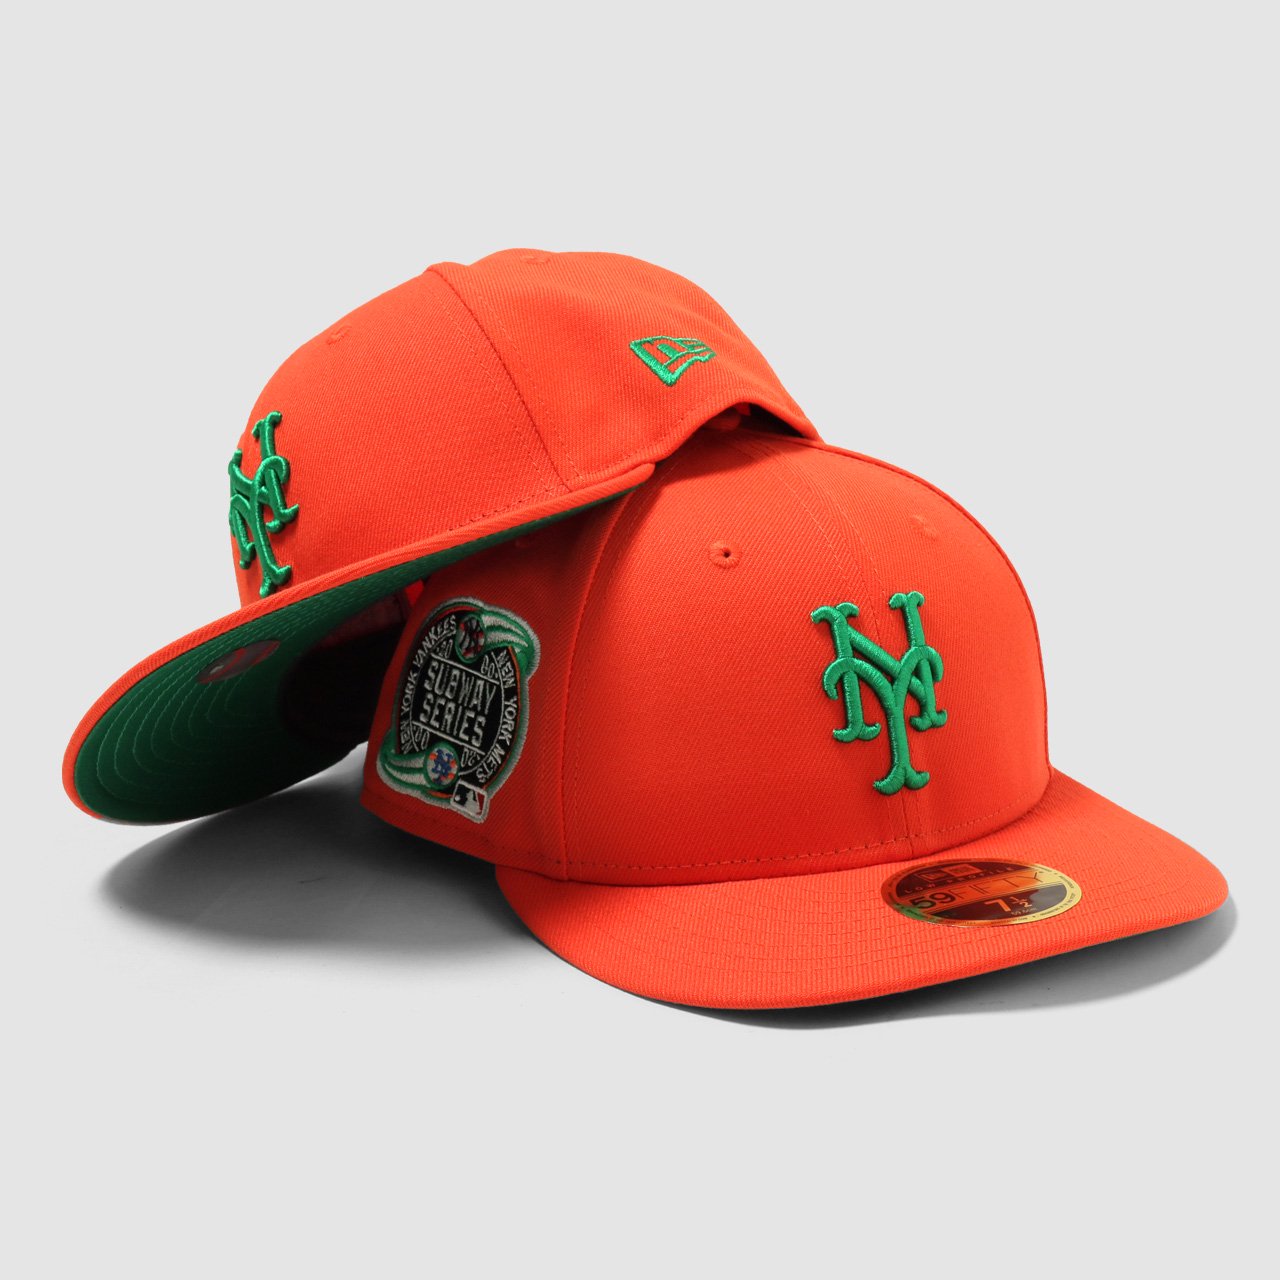 <img class='new_mark_img1' src='https://img.shop-pro.jp/img/new/icons35.gif' style='border:none;display:inline;margin:0px;padding:0px;width:auto;' />New York Mets Subway Series New Era Low Profile 59Fifty Cap Orange